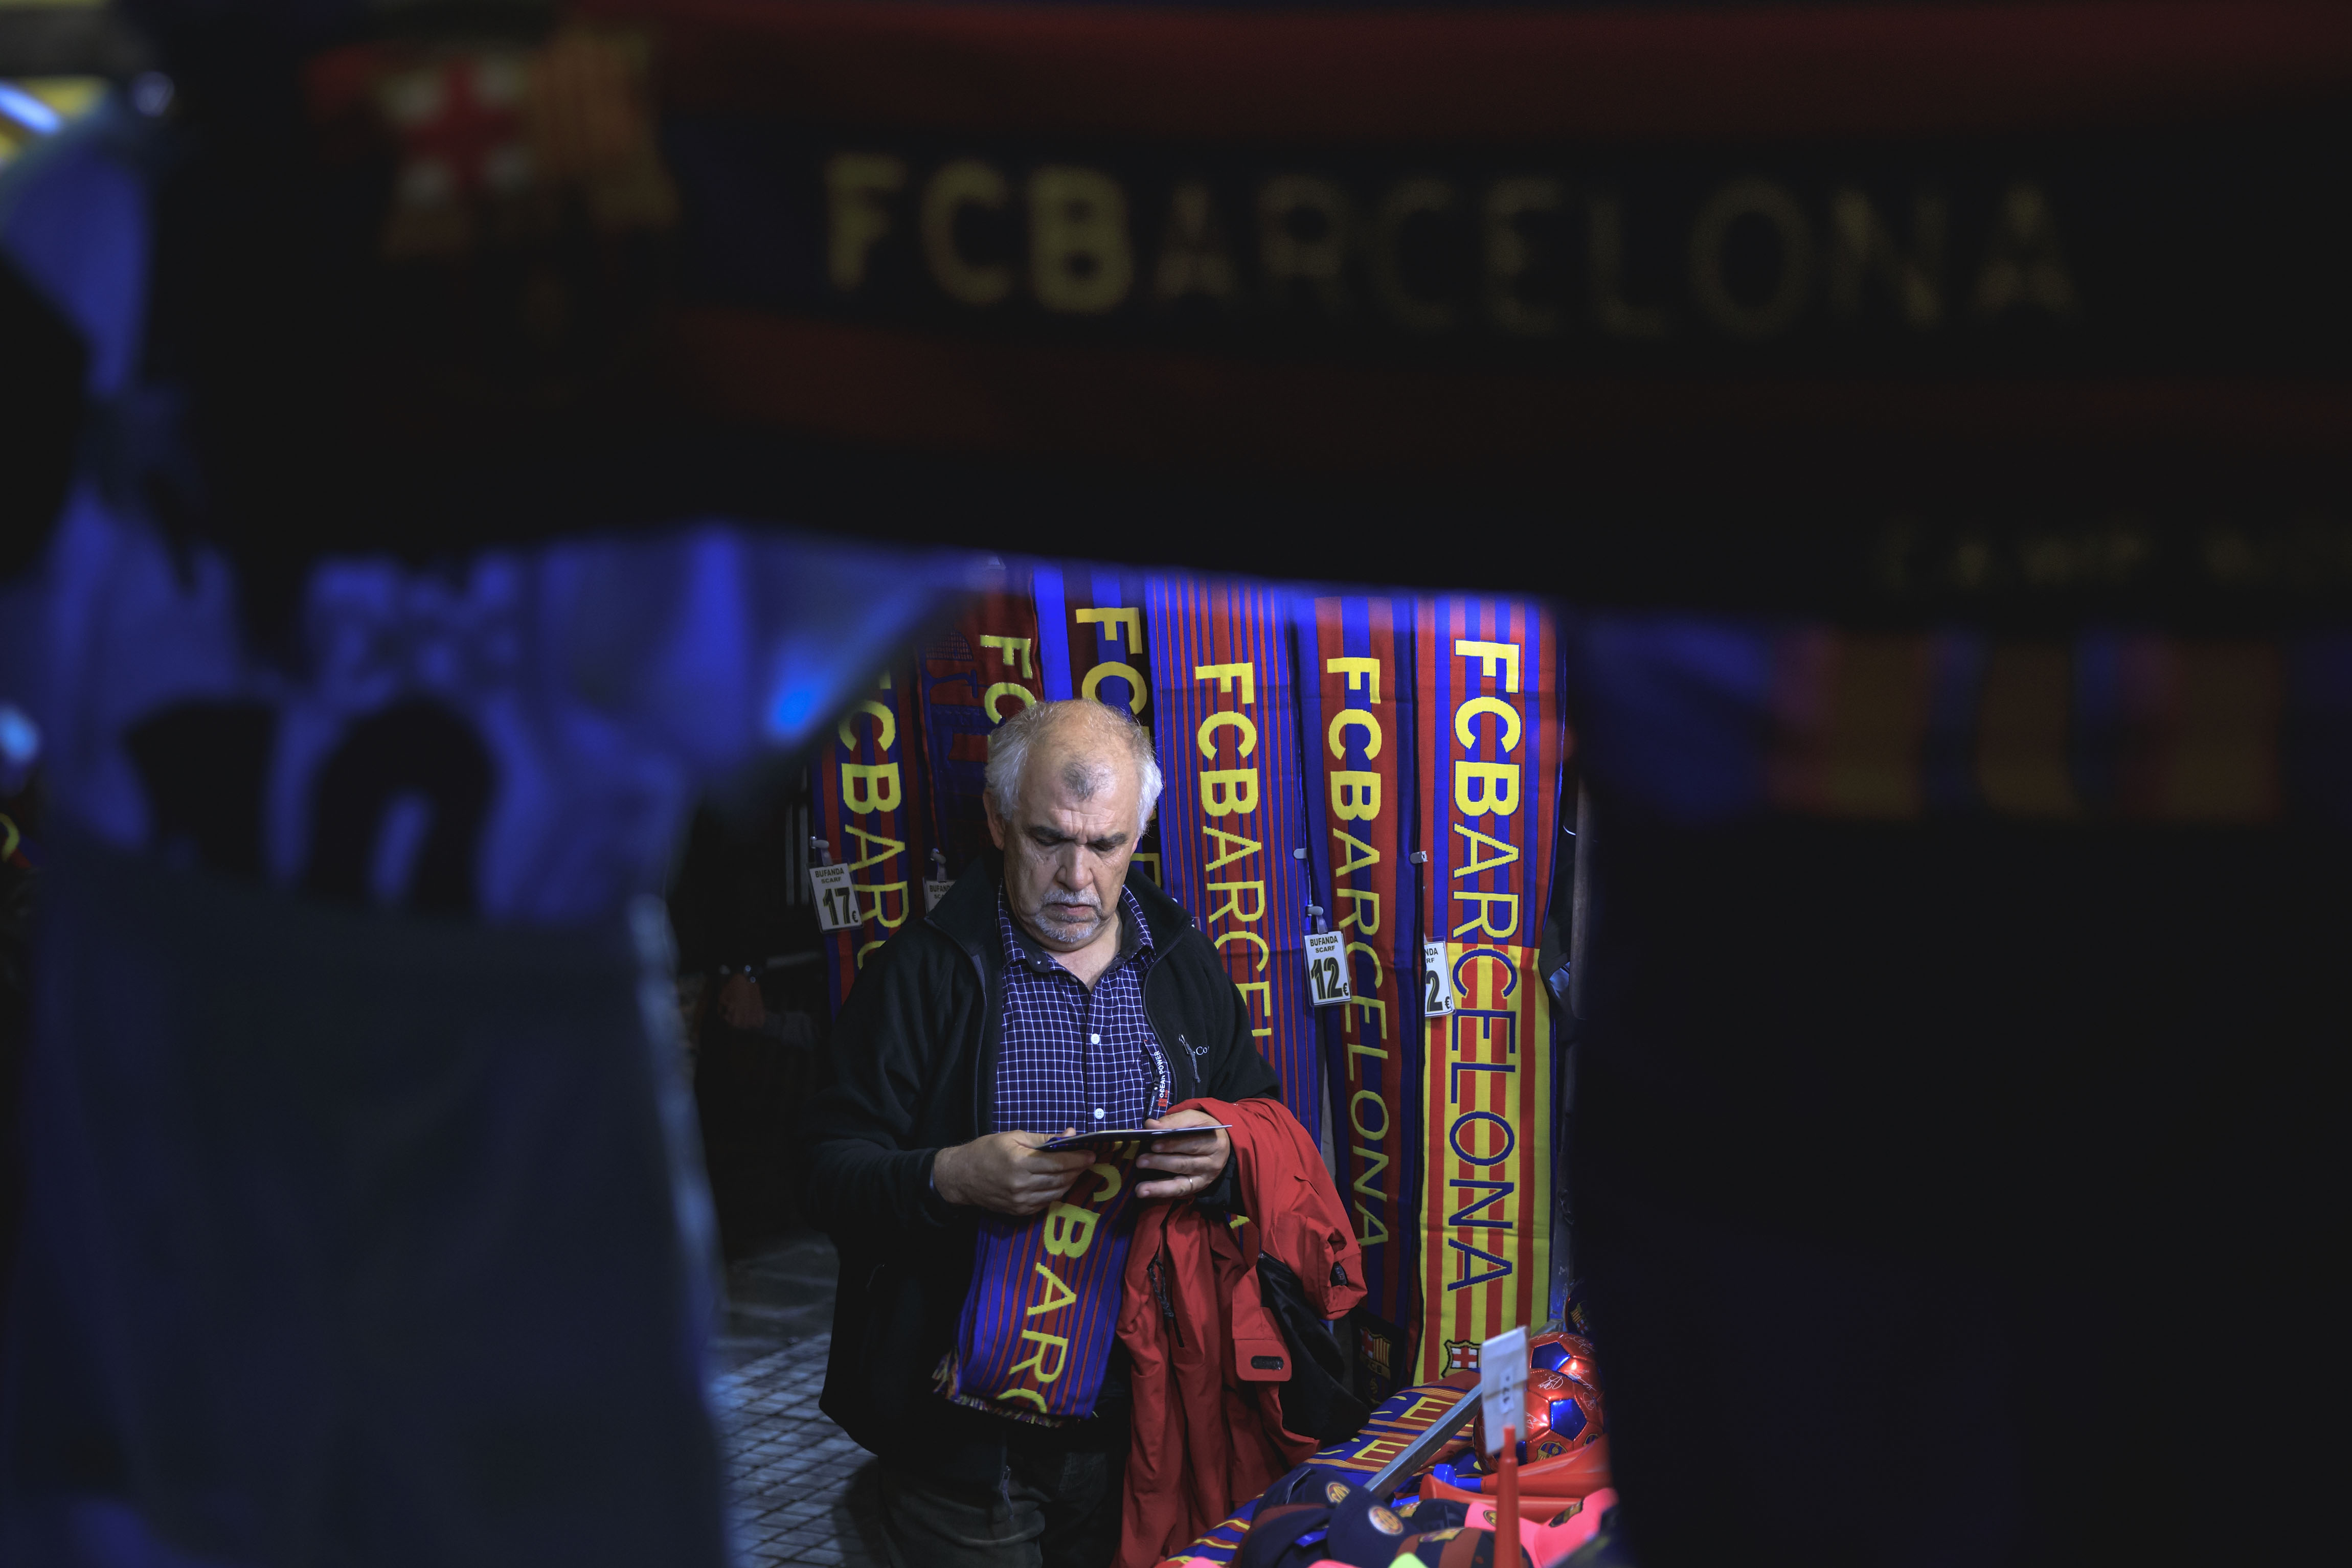 BARCELONA, SPAIN - NOVEMBER 04: A man buys a FC Barcelona scarf at a merchandaisng stall before the La Liga match between FC Barcelona and Sevilla FC at Camp Nou stadium on November 4, 2017 in Barcelona, Spain.  (Photo by Gonzalo Arroyo Moreno/Getty Images)